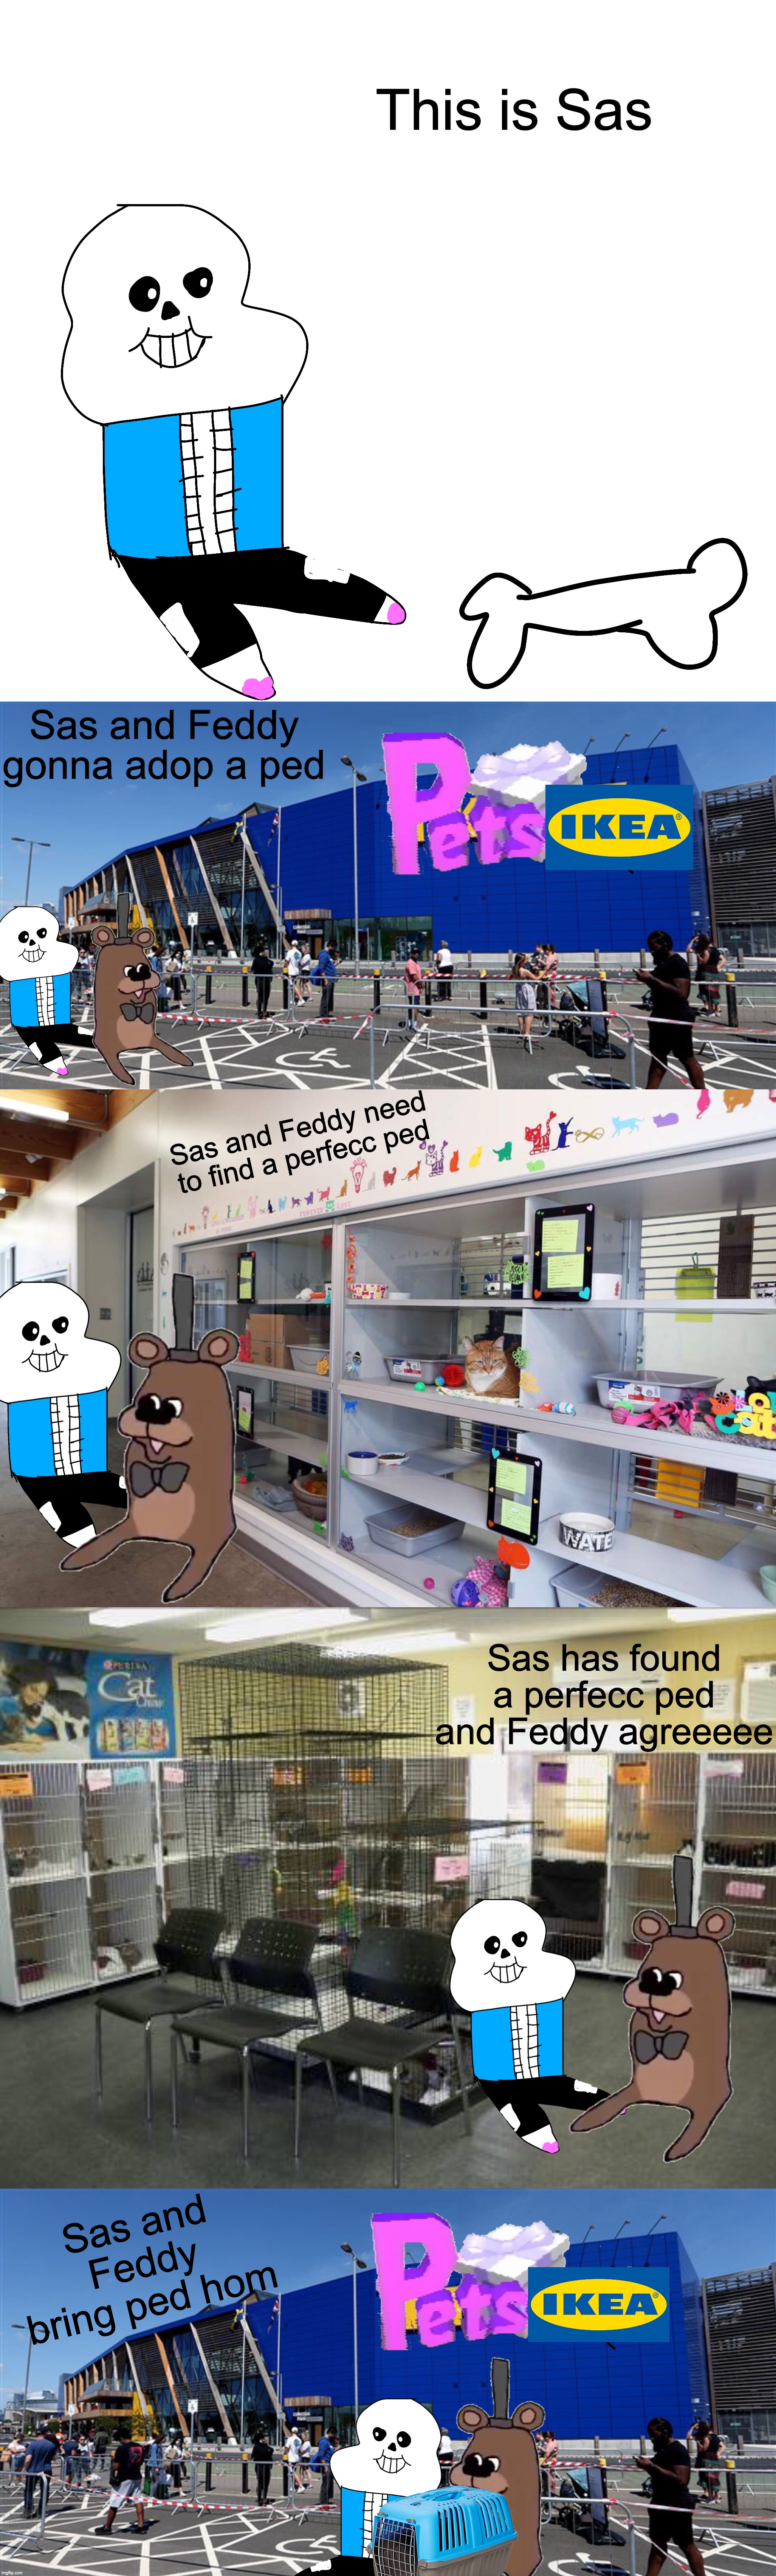 Sas and Feddy part 3.5: New Ped | This is Sas; Sas and Feddy gonna adop a ped; Sas and Feddy need to find a perfecc ped; Sas has found a perfecc ped and Feddy agreeeee; Sas and Feddy bring ped hom | image tagged in memes,funny,sans,freddy fazbear,crossover,undertale | made w/ Imgflip meme maker